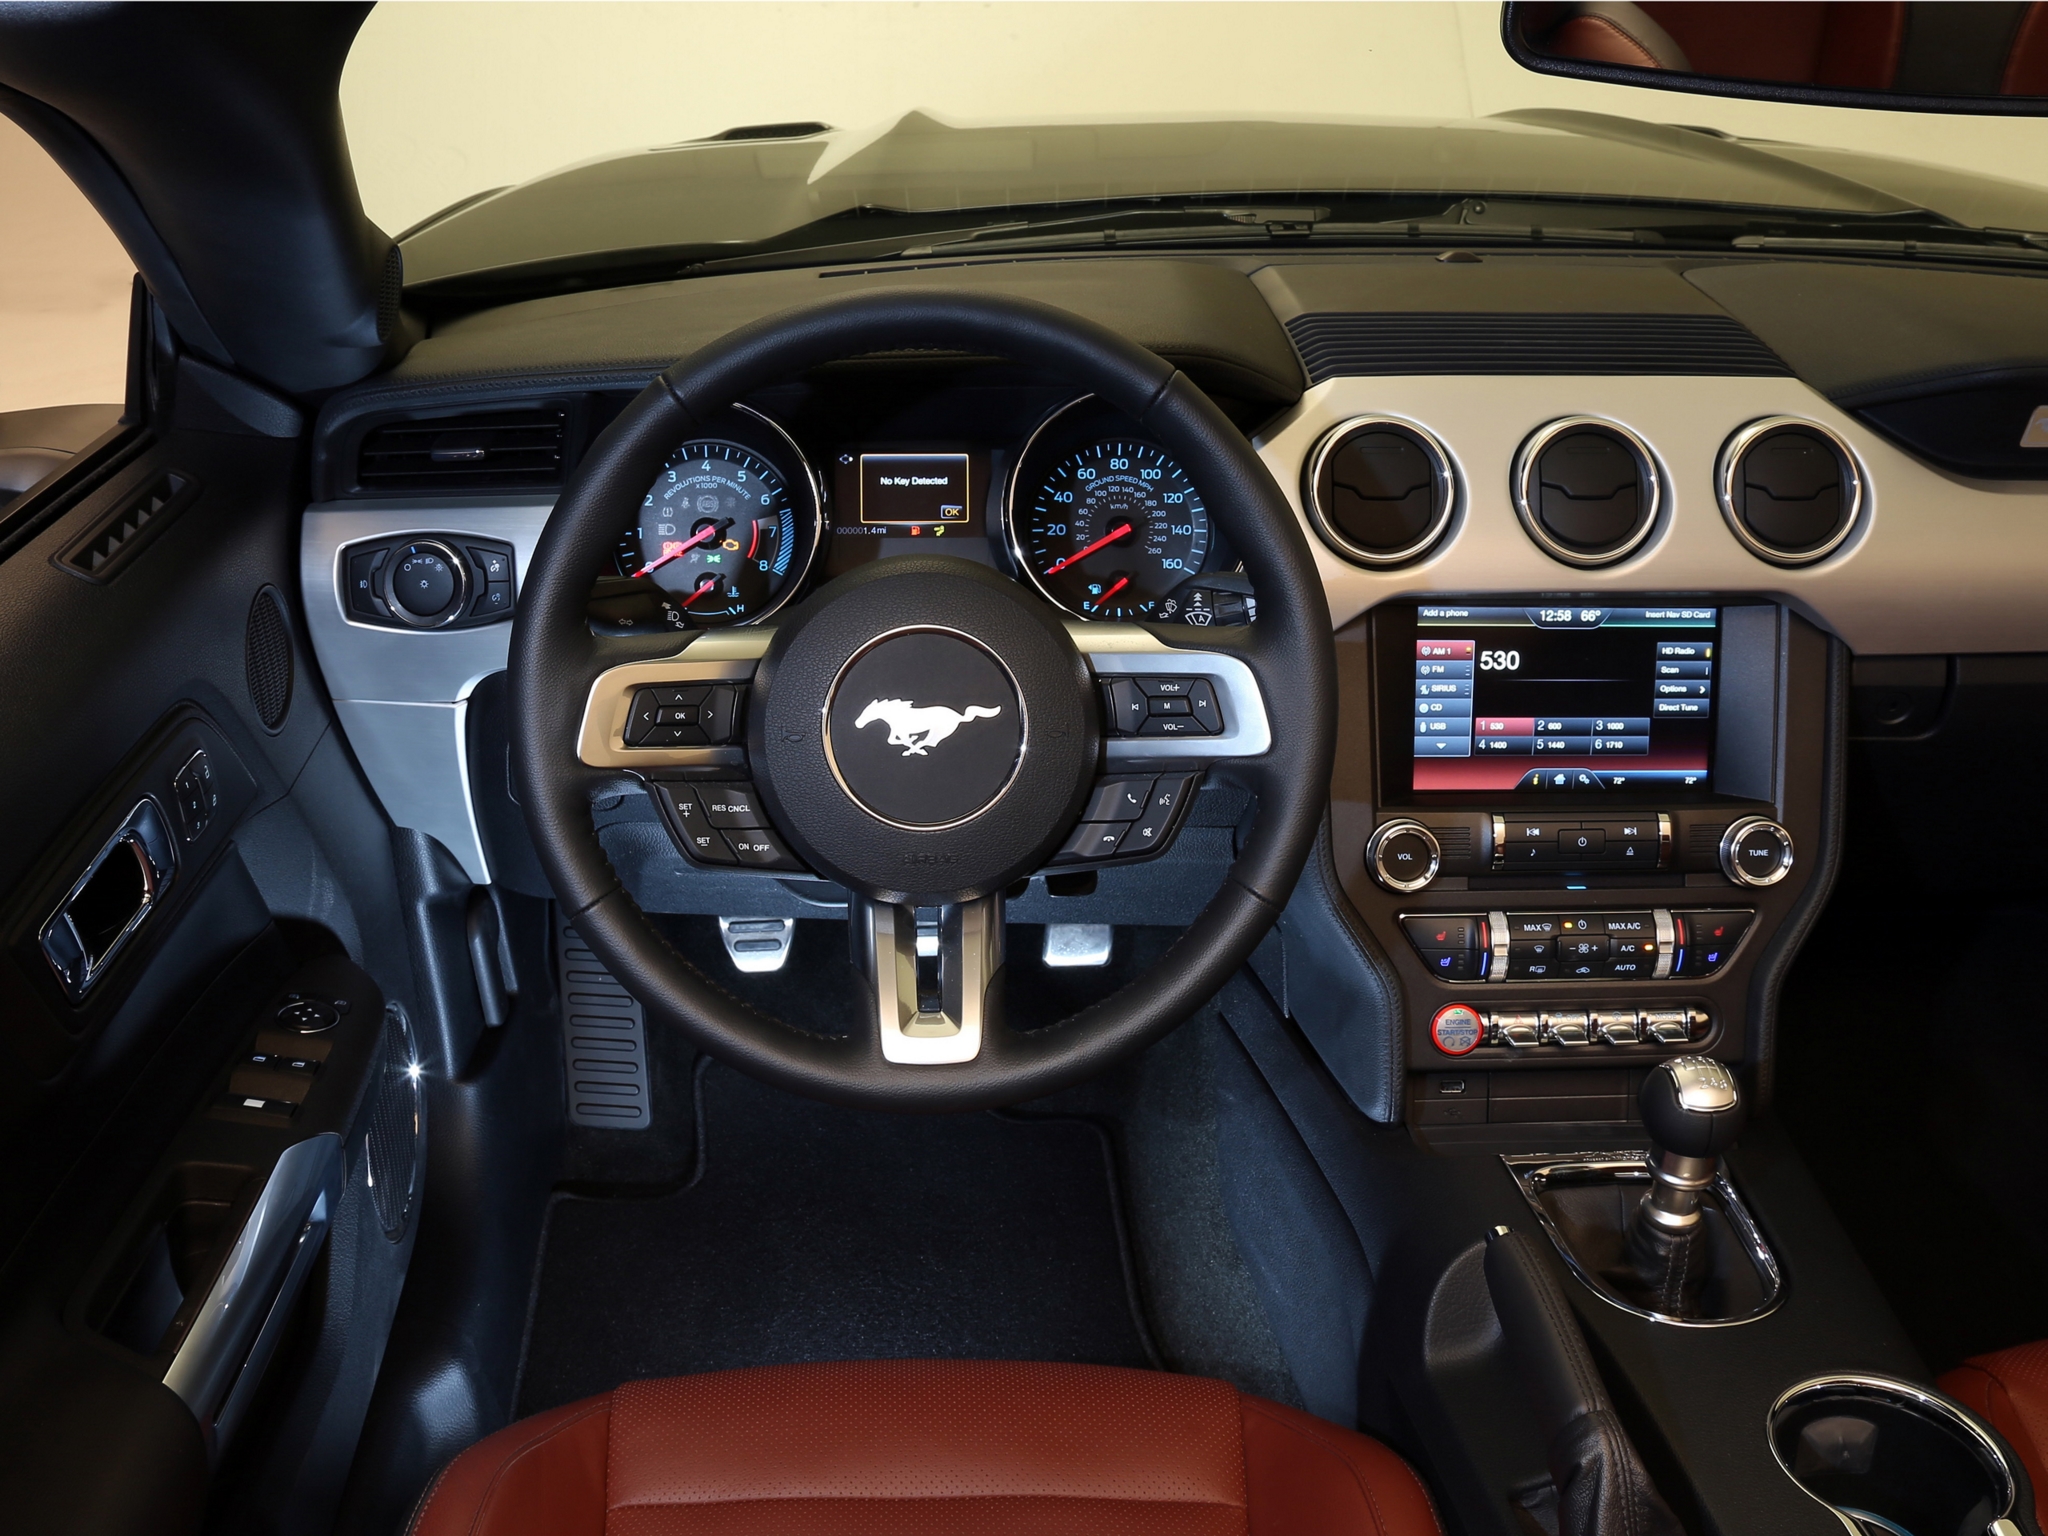 2014, Ford, Mustang, G t, Convertible, Muscle, Interior Wallpaper